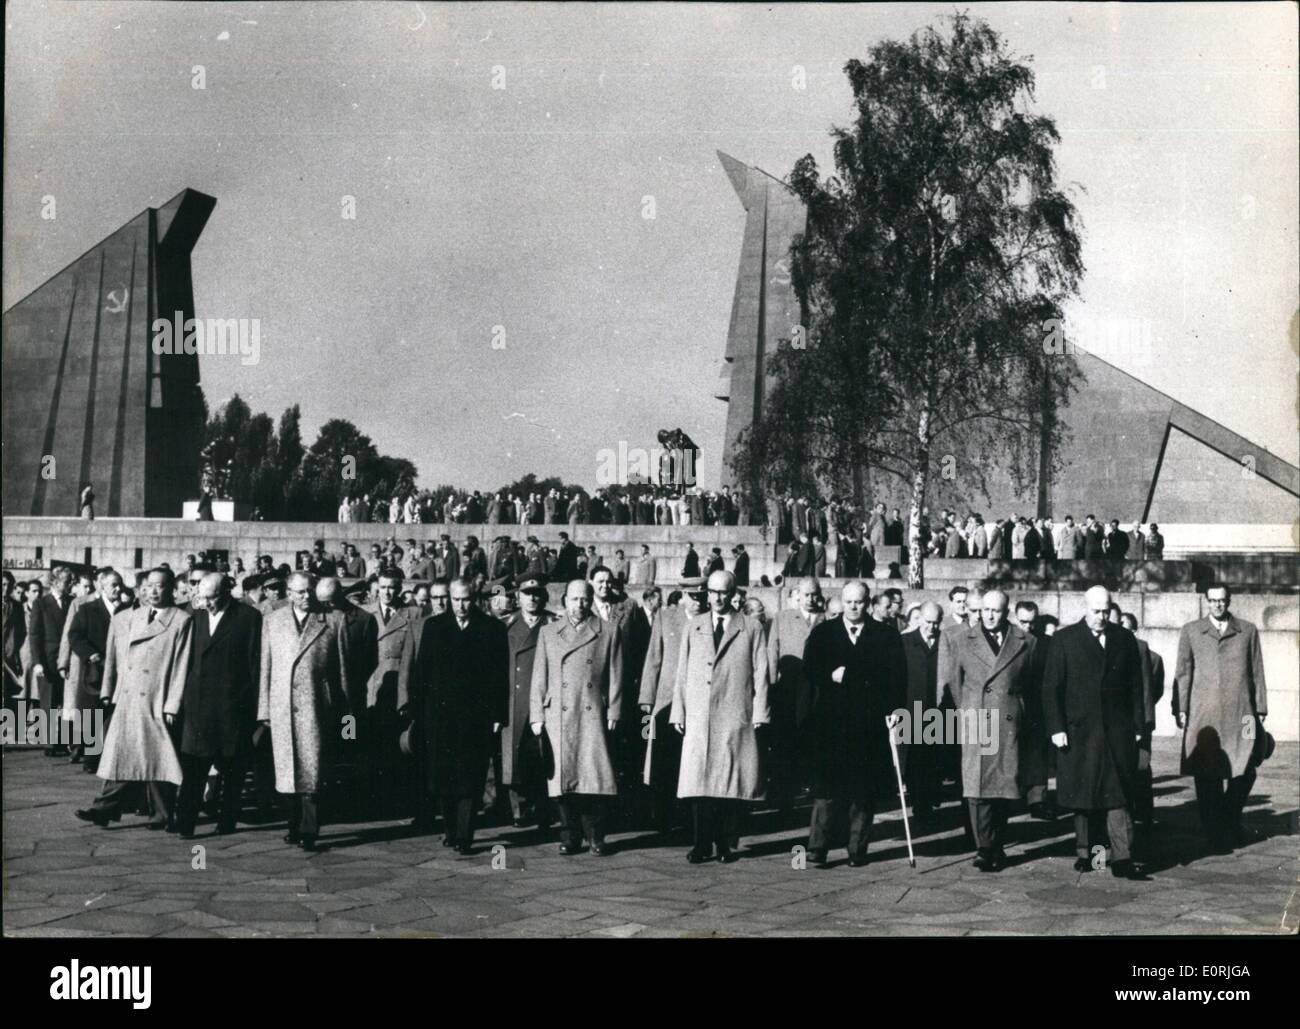 Oct. 10, 1959 - 10 years German Democratic Republic on Oct. 7th 1959: On occasion of the 10th anniversary of the foundation of the German Democratic Republic (East-Germany), party and government delegations who had come to Berlin to participate in the festivities for the anniversary honoured the Soviet soldiers who died during the war. Photo shows representatives of the East-German government and members of the foreign delegations at the Soviet memorial in Berlin. Stock Photo